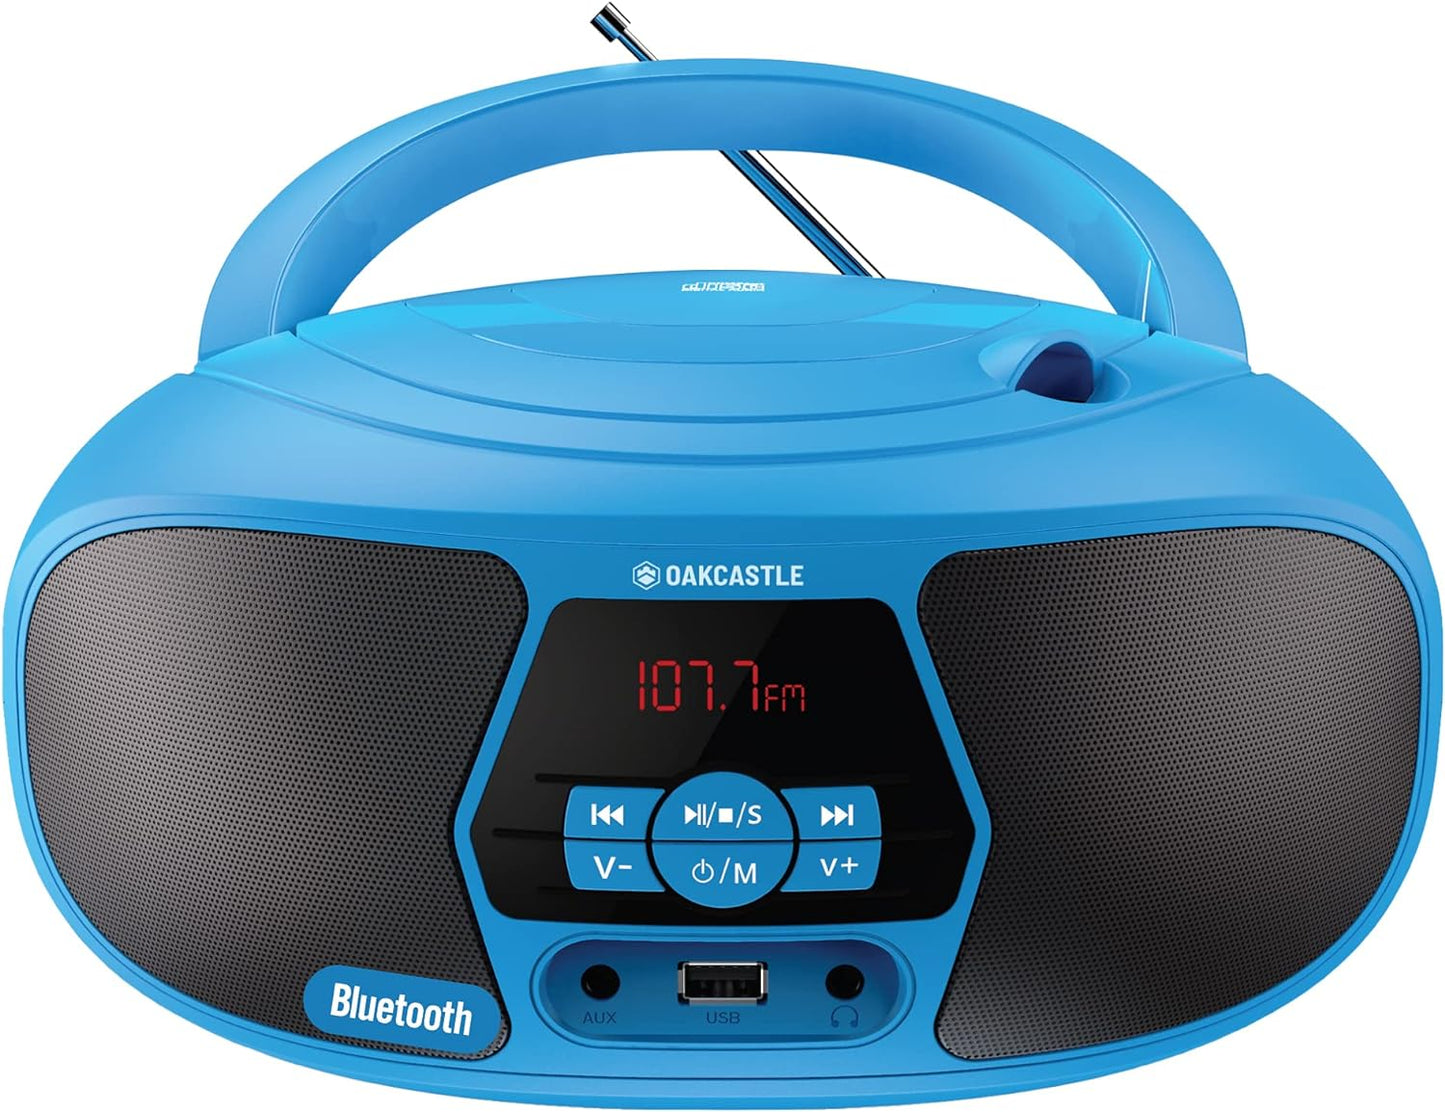 BX200 Portable CD Player Boombox | Bluetooth, FM Radio, USB & Aux Playback | 2.0 Stereo Sound | 15hr Battery Playtime | Headphone Jack, Simple Controls, LED Display, Oakcastle